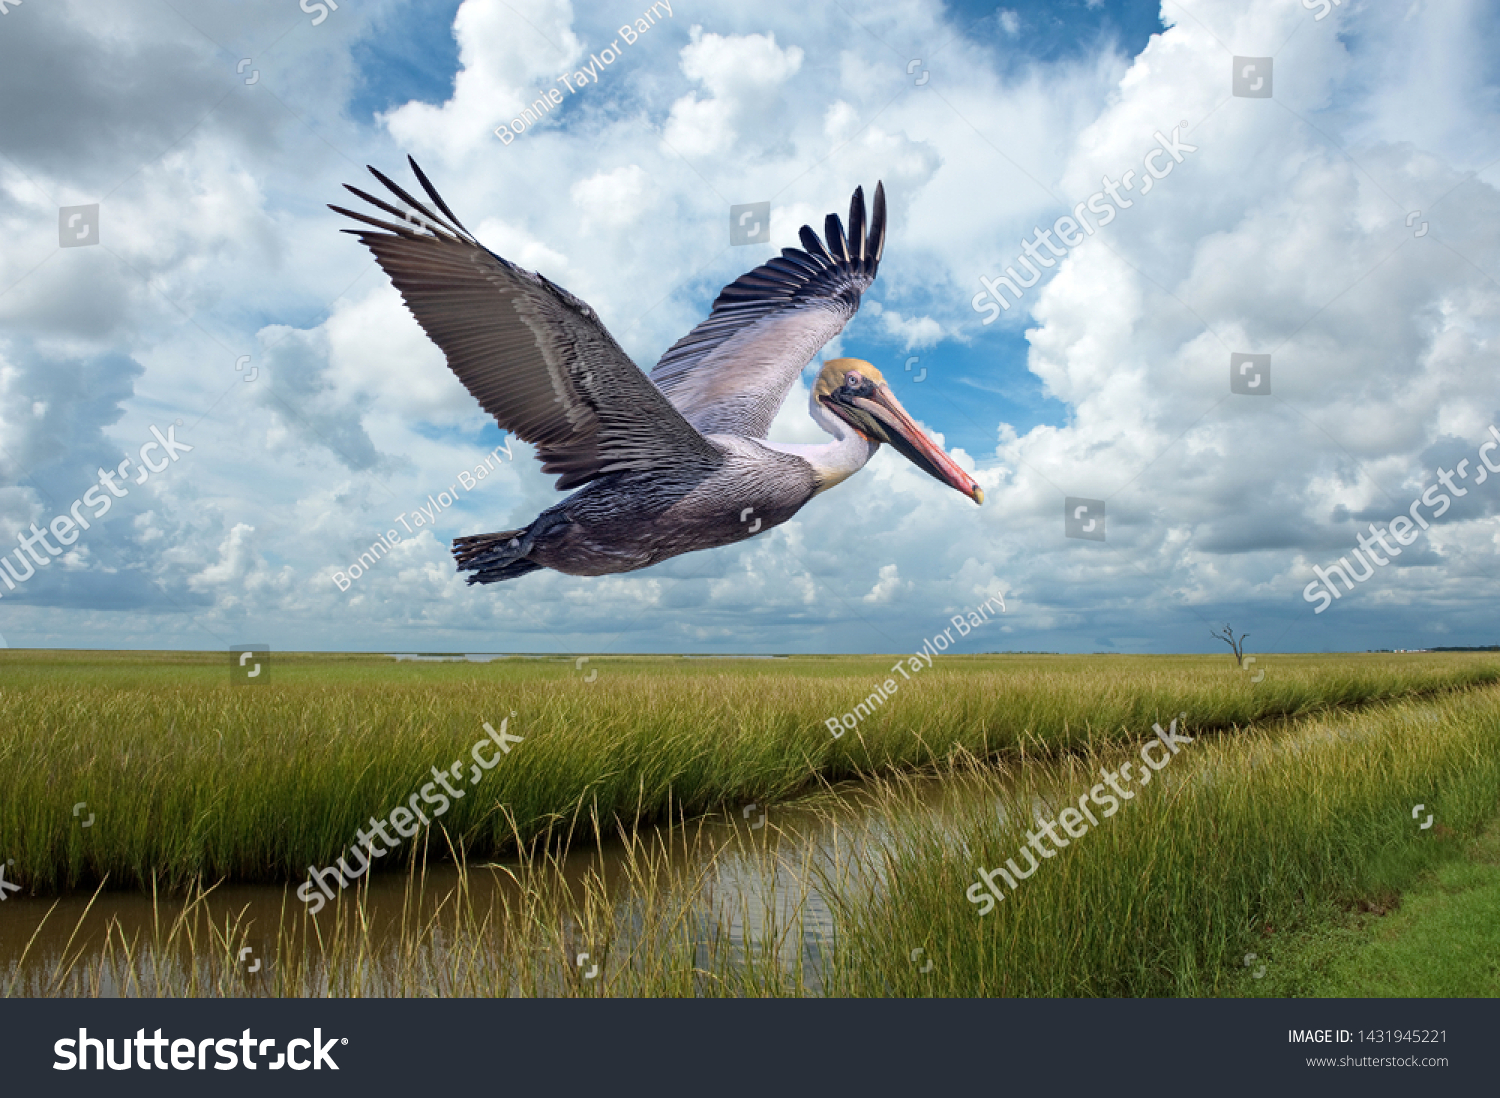 Brown Pelican in Flight Over Marshlands at Grand Isle Louisiana Against Cloudy Sky #1431945221